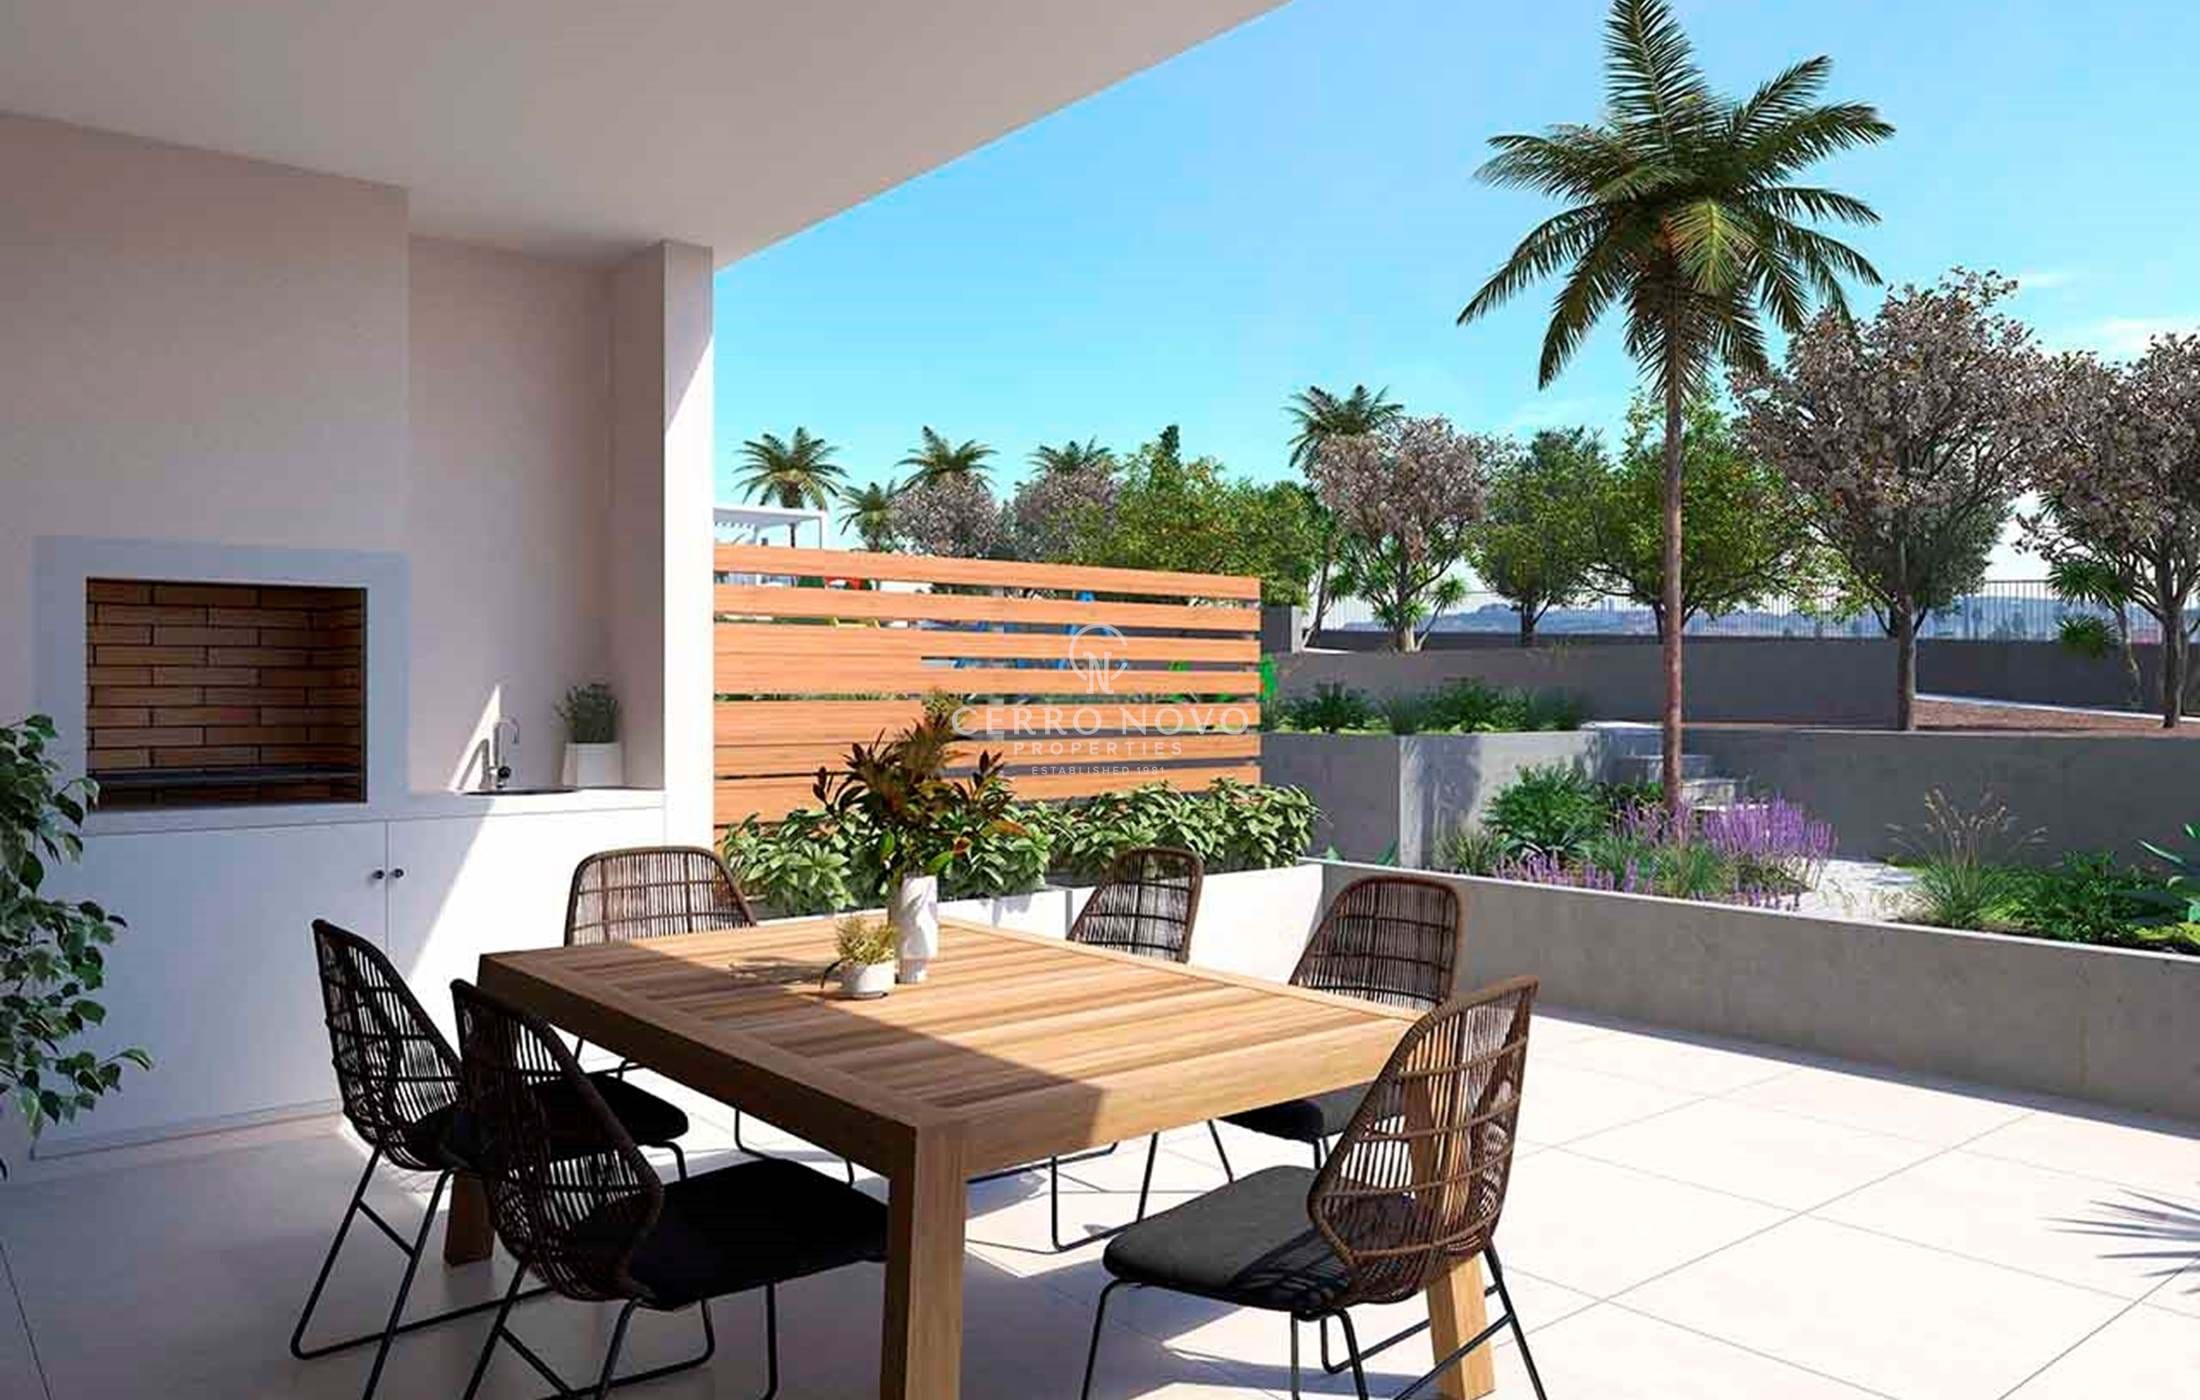 Eco- Luxury apartments with terraces and heated swimming pool